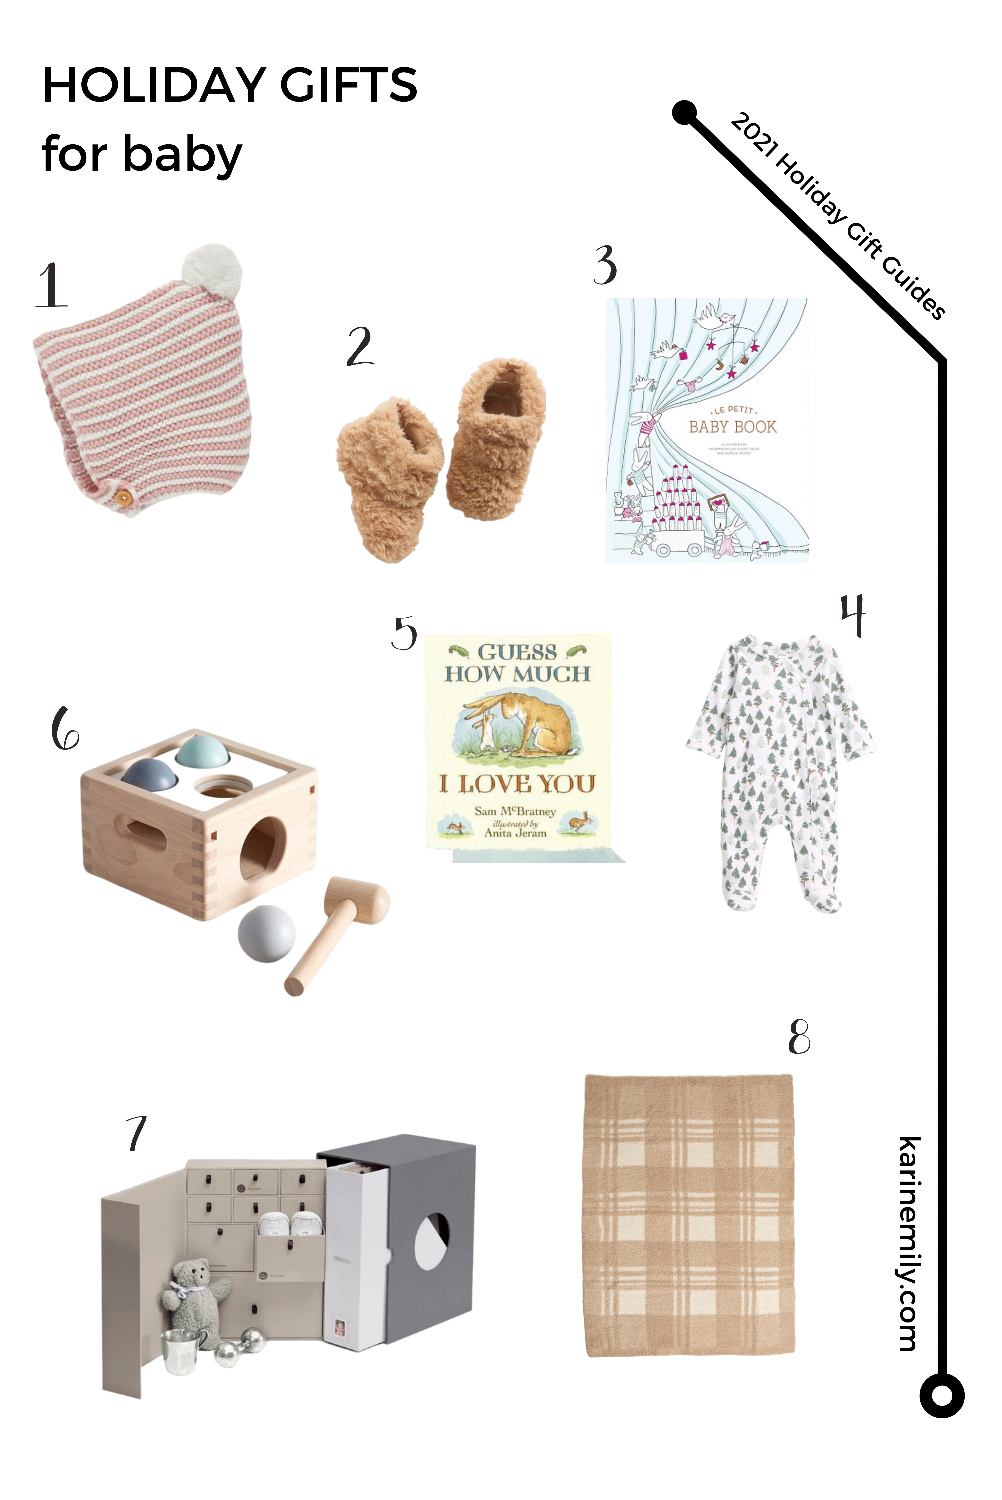 Karin Emily shares her 2021 Holiday Gift Guides for baby